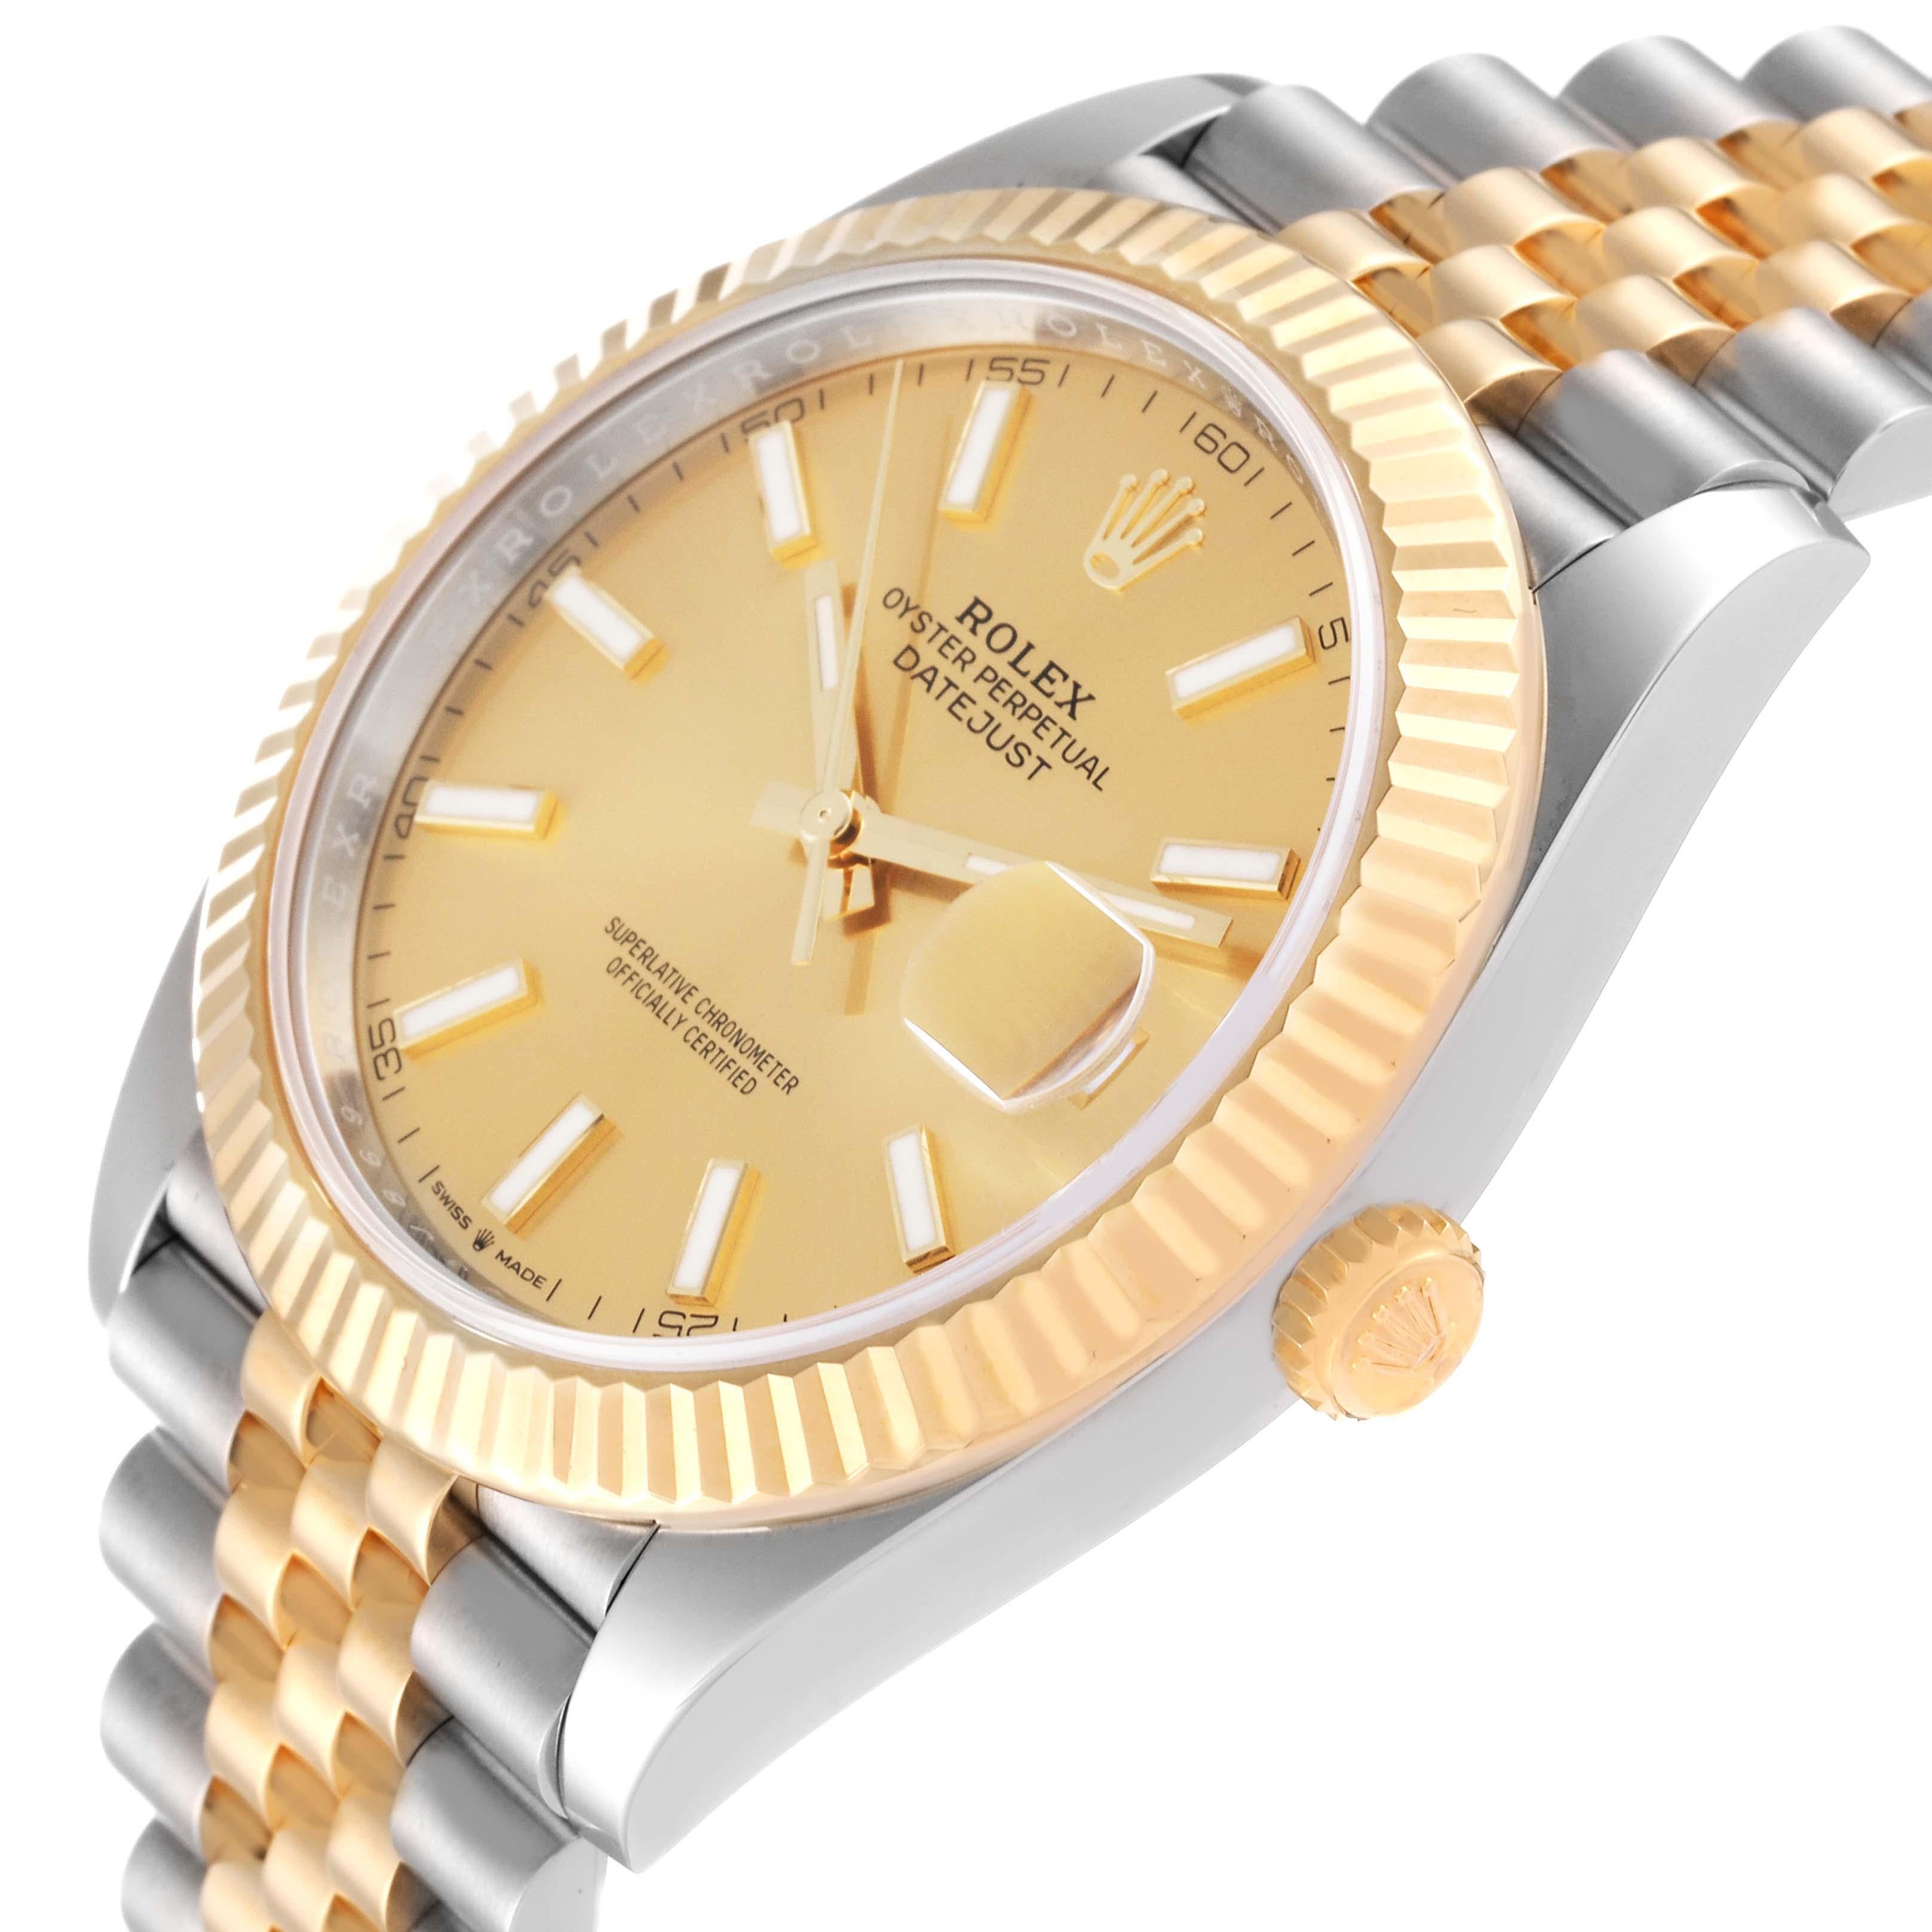 Rolex Datejust 41 Steel Yellow Gold Champagne Dial Mens Watch 126333 Box Card 1